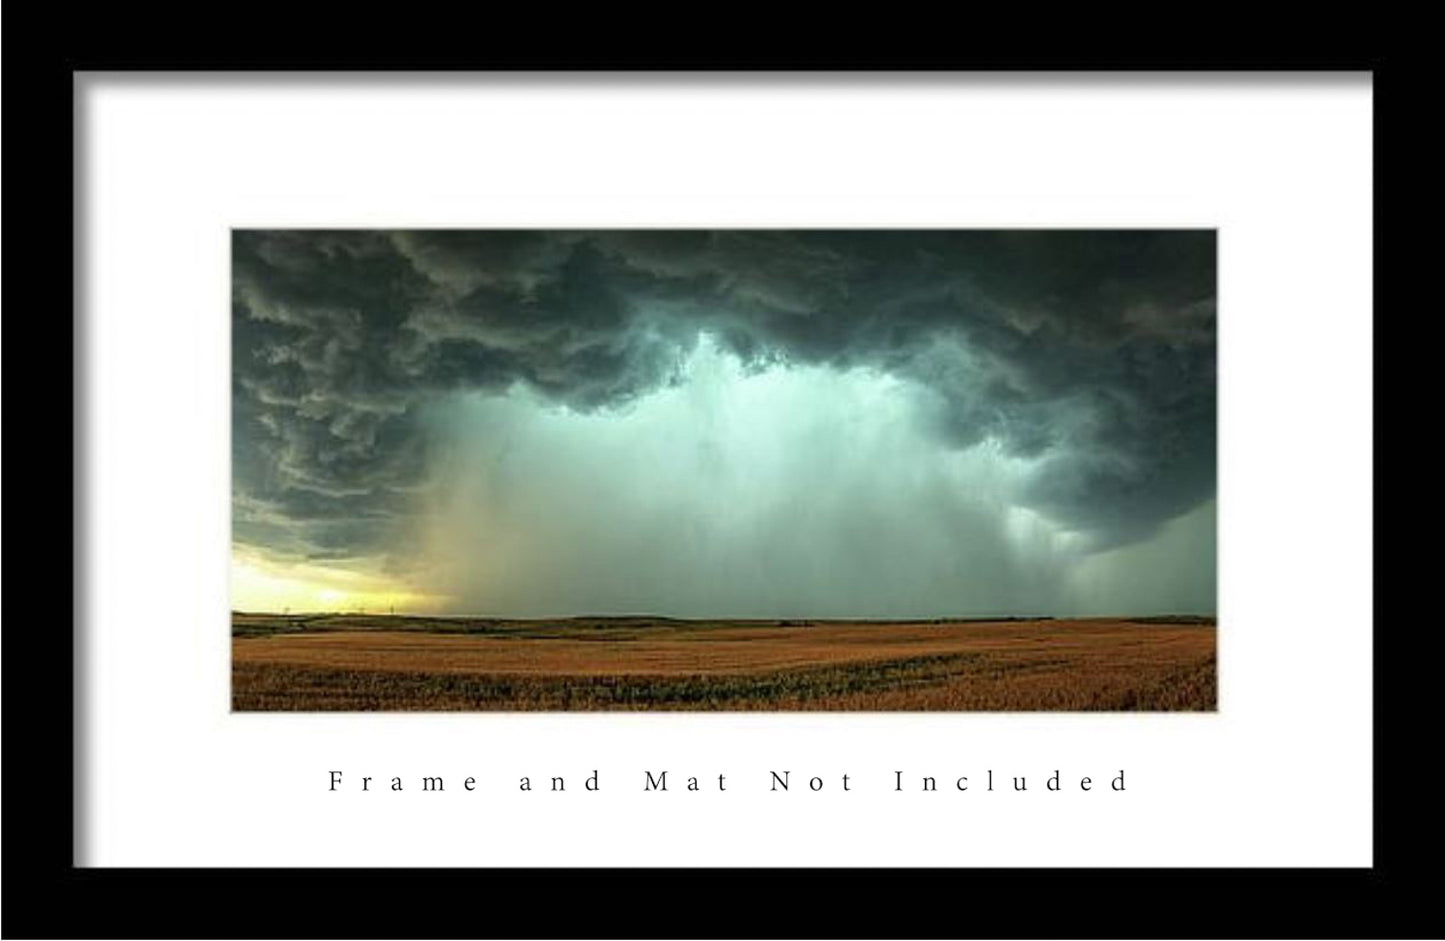 Storm Wall Art - Panoramic Picture of Thunderstorm Spanning Horizon in Oklahoma - Weather Photography Photo Artwork Decor